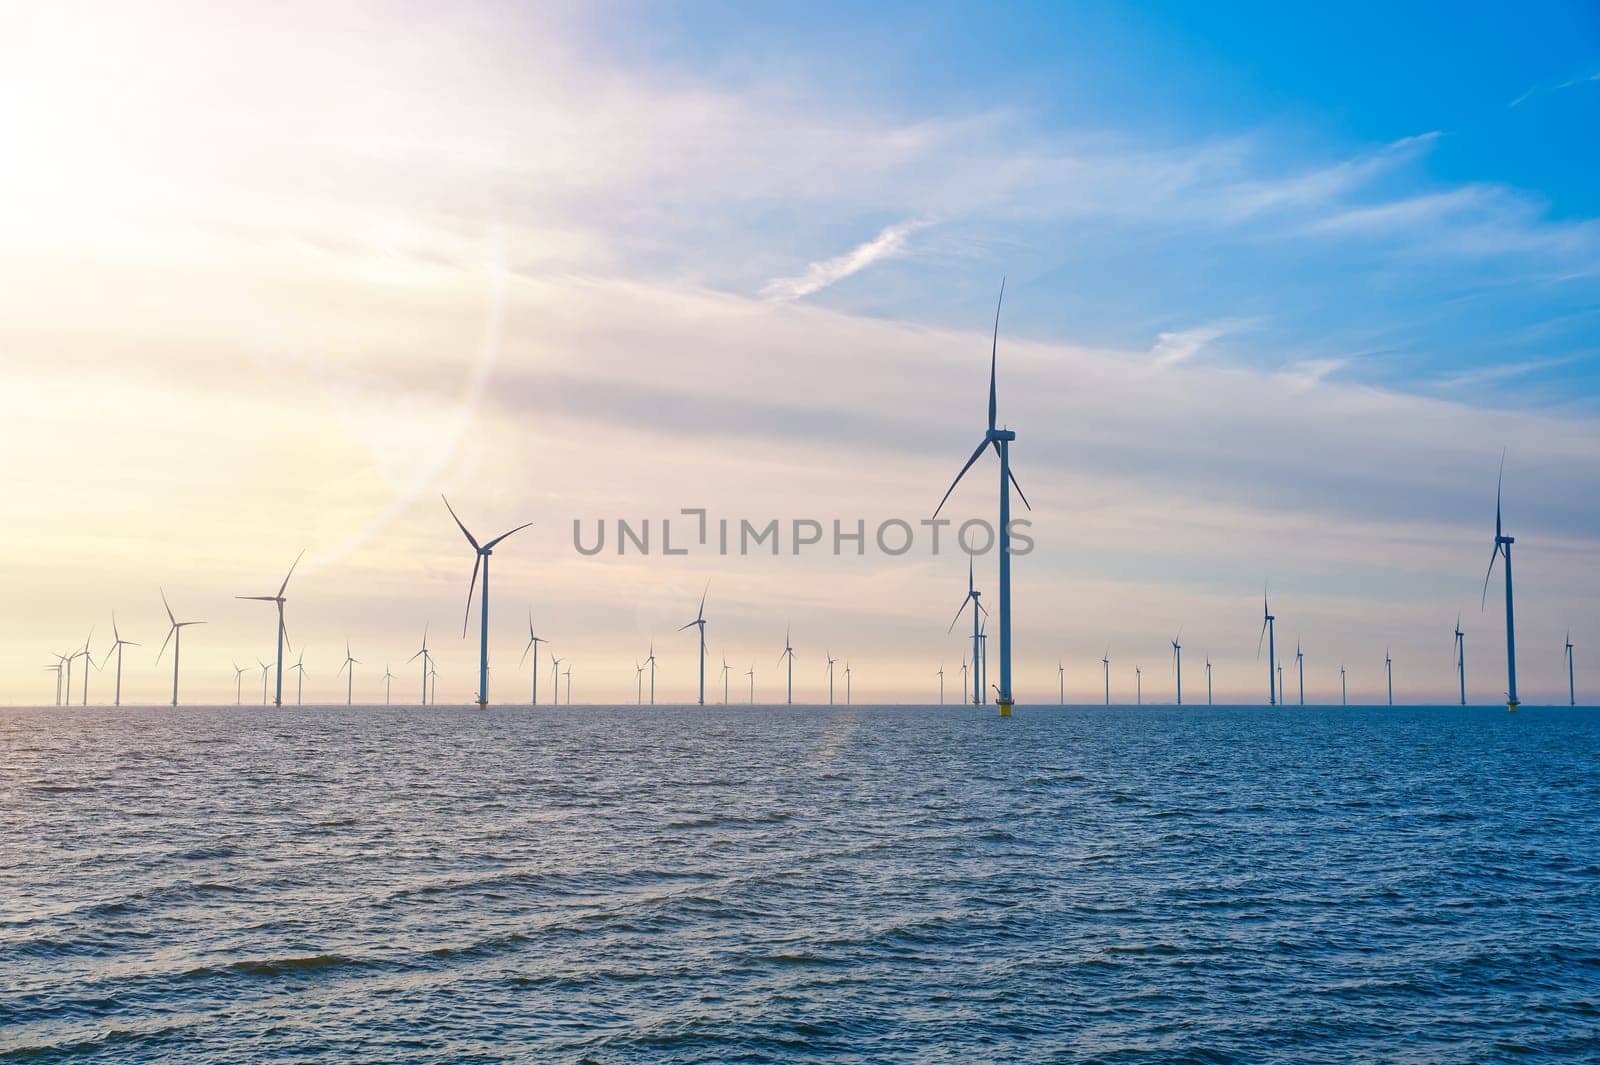 Offshore Windmill farm. windmills isolated at sea on a beautiful bright day Netherlands by PhotoTime